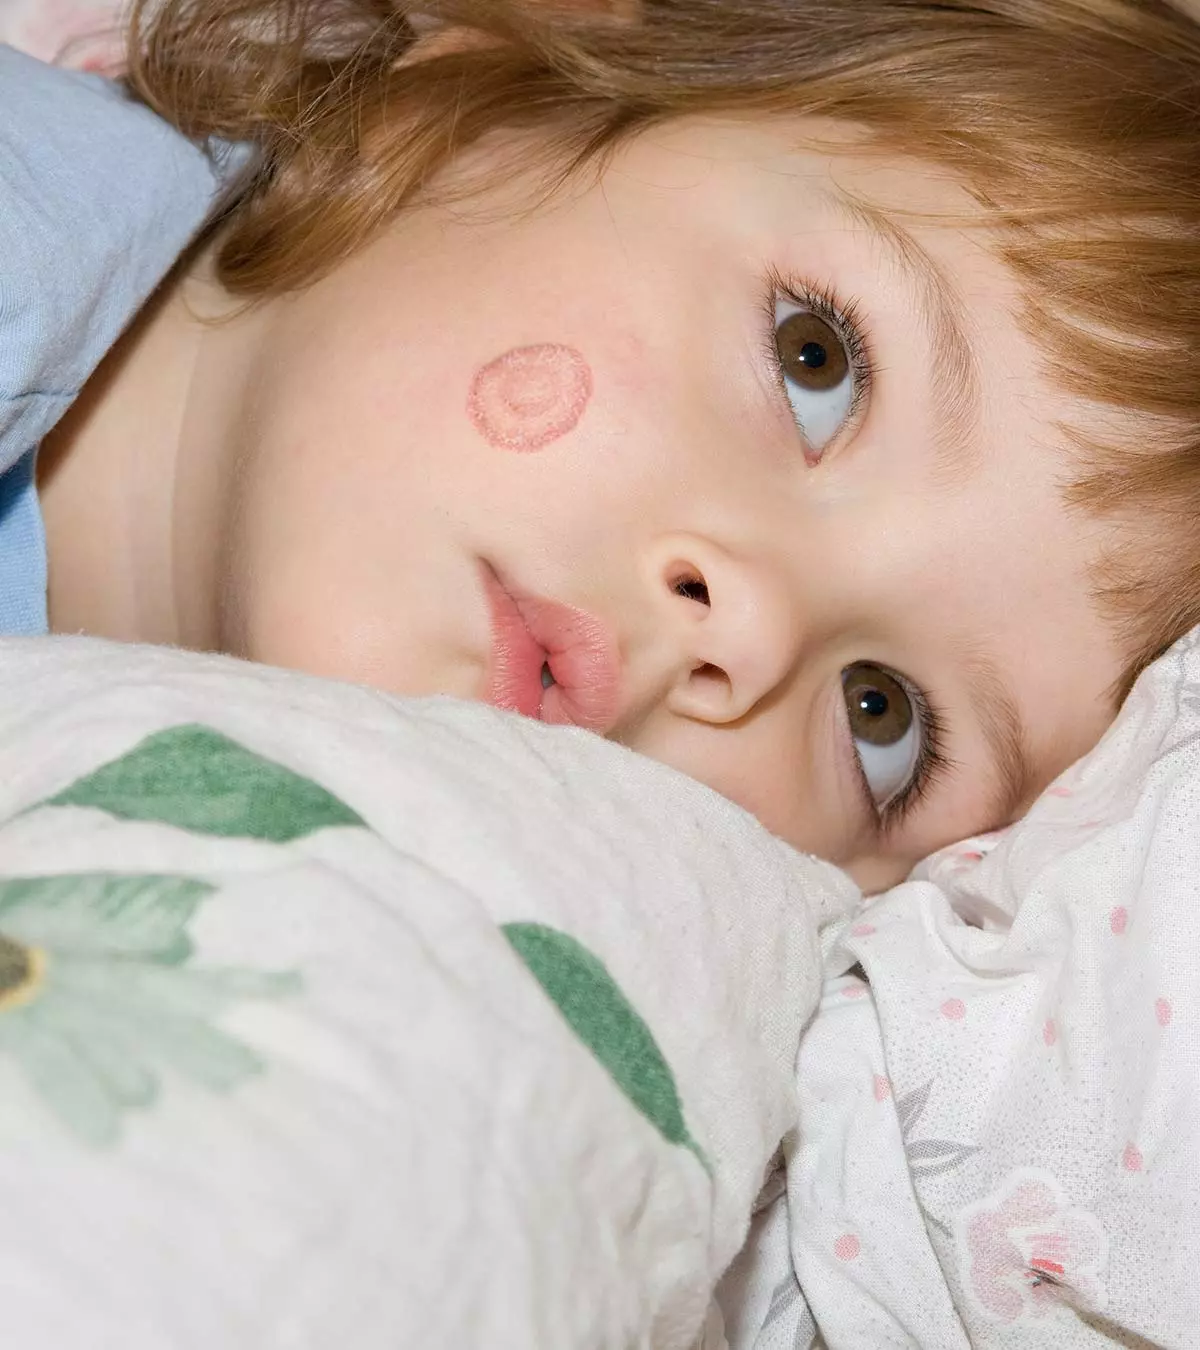 Ringworm In Kids Causes, Symptoms And Treatment